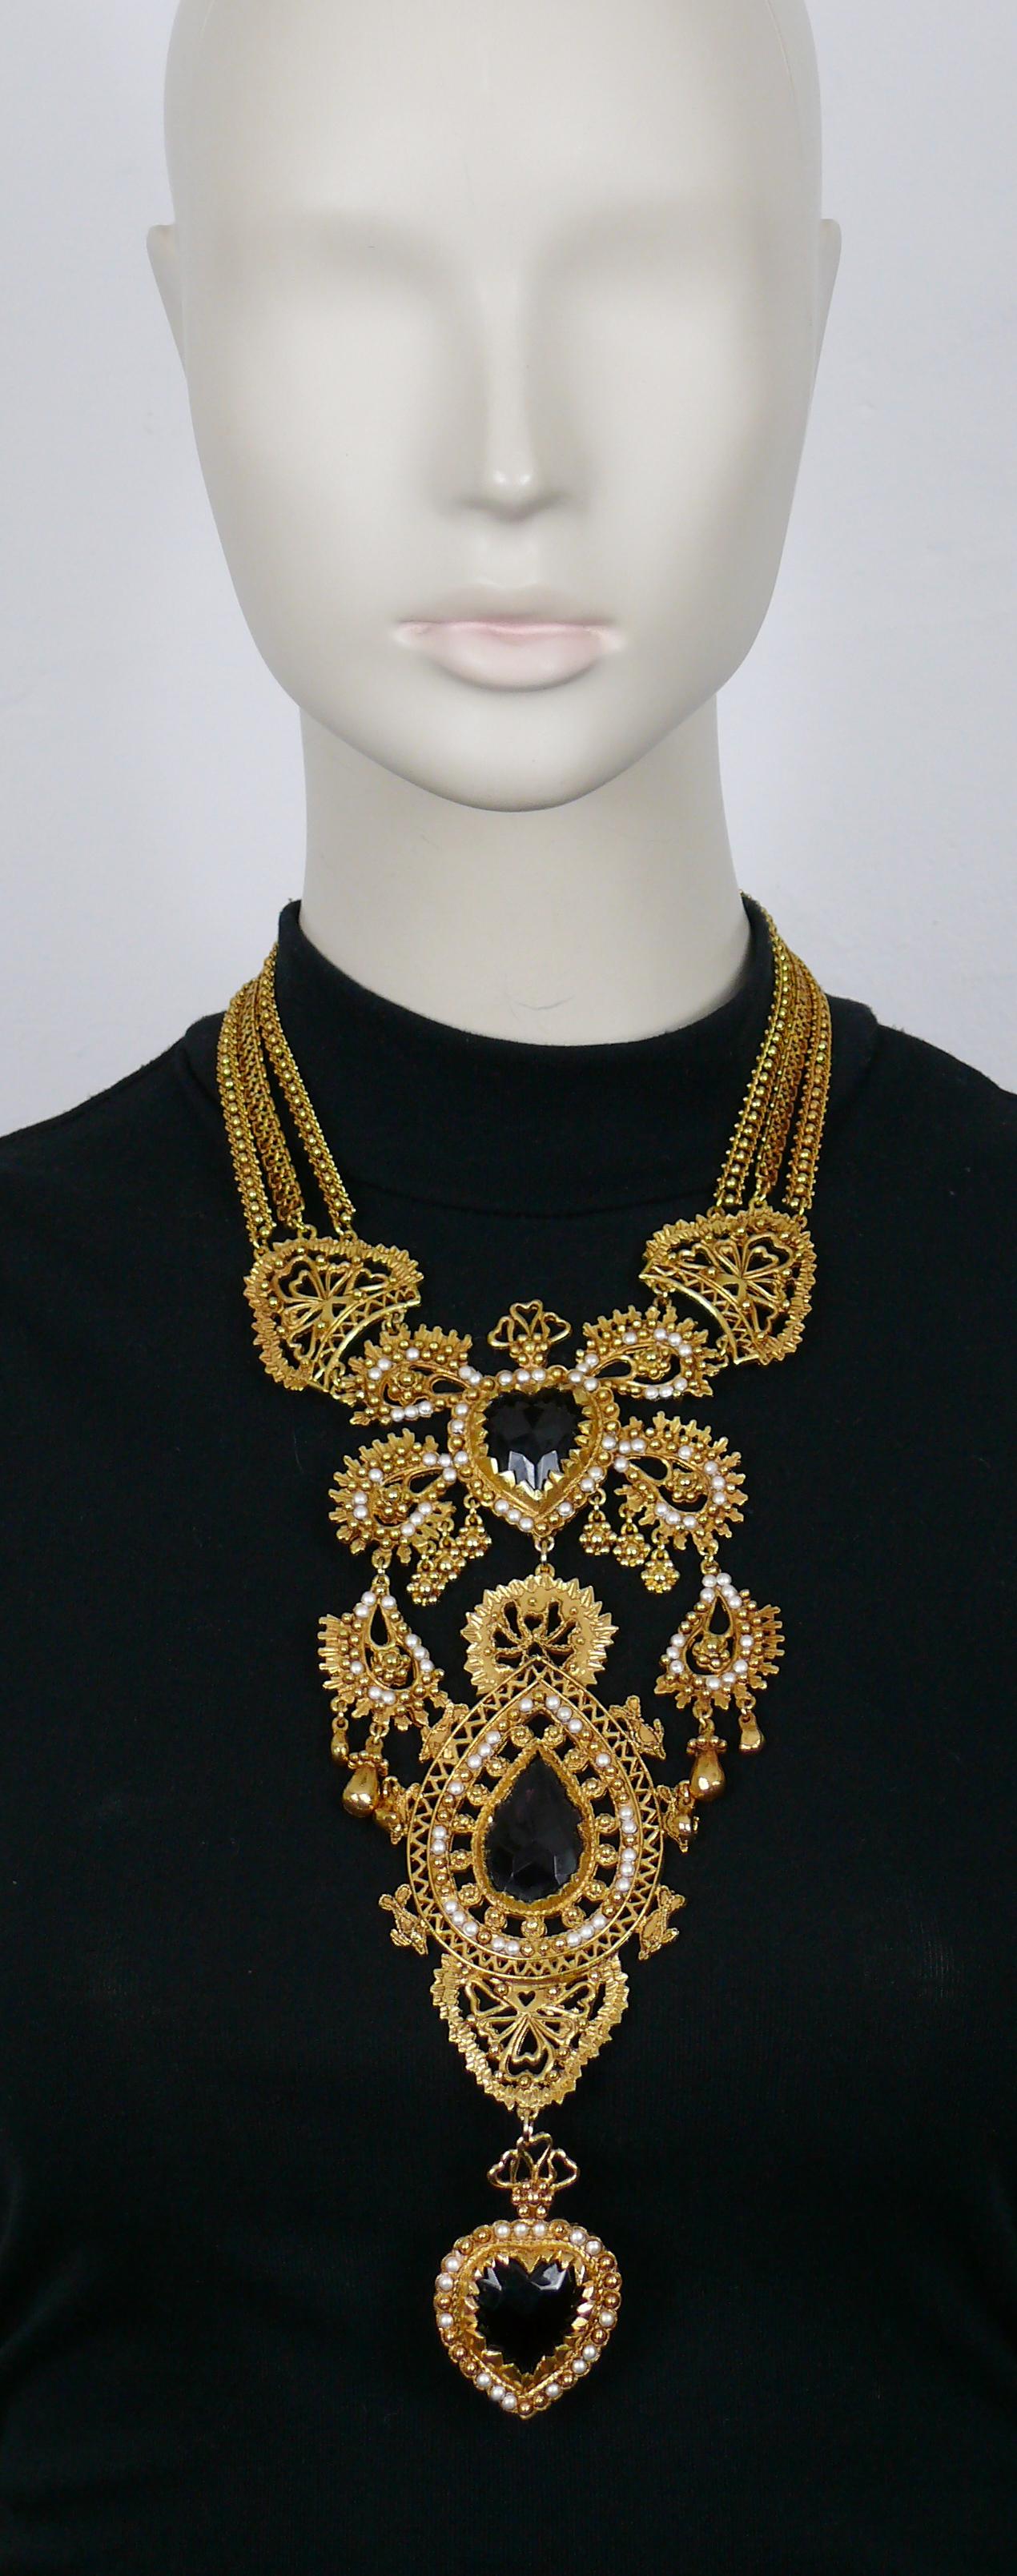 CHRISTIAN LACROIX vintage incredible opulent gold tone multi chain plastron necklace featuring ex voto sacred hearts, adorned with boteh-like design details, embellished with ruby/purple/black colour glass cabochons and small off-white pearls.

Hook